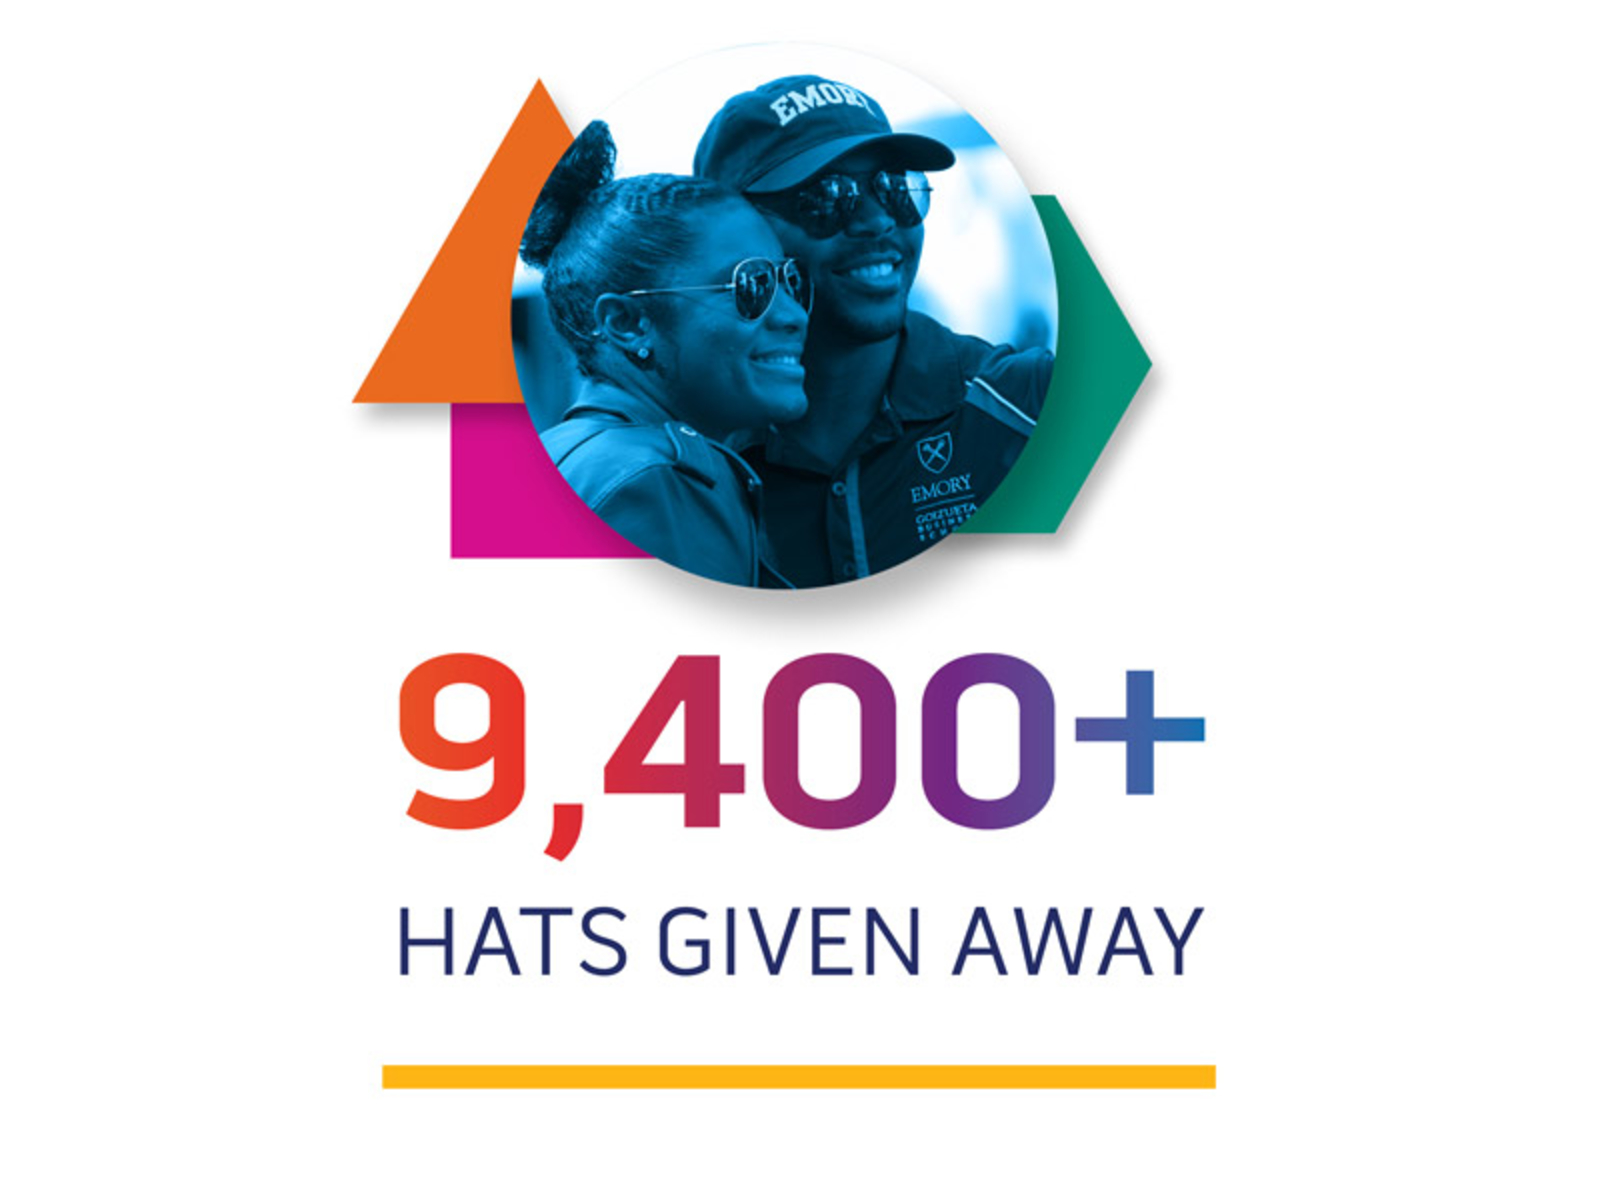 9400+ hats given away